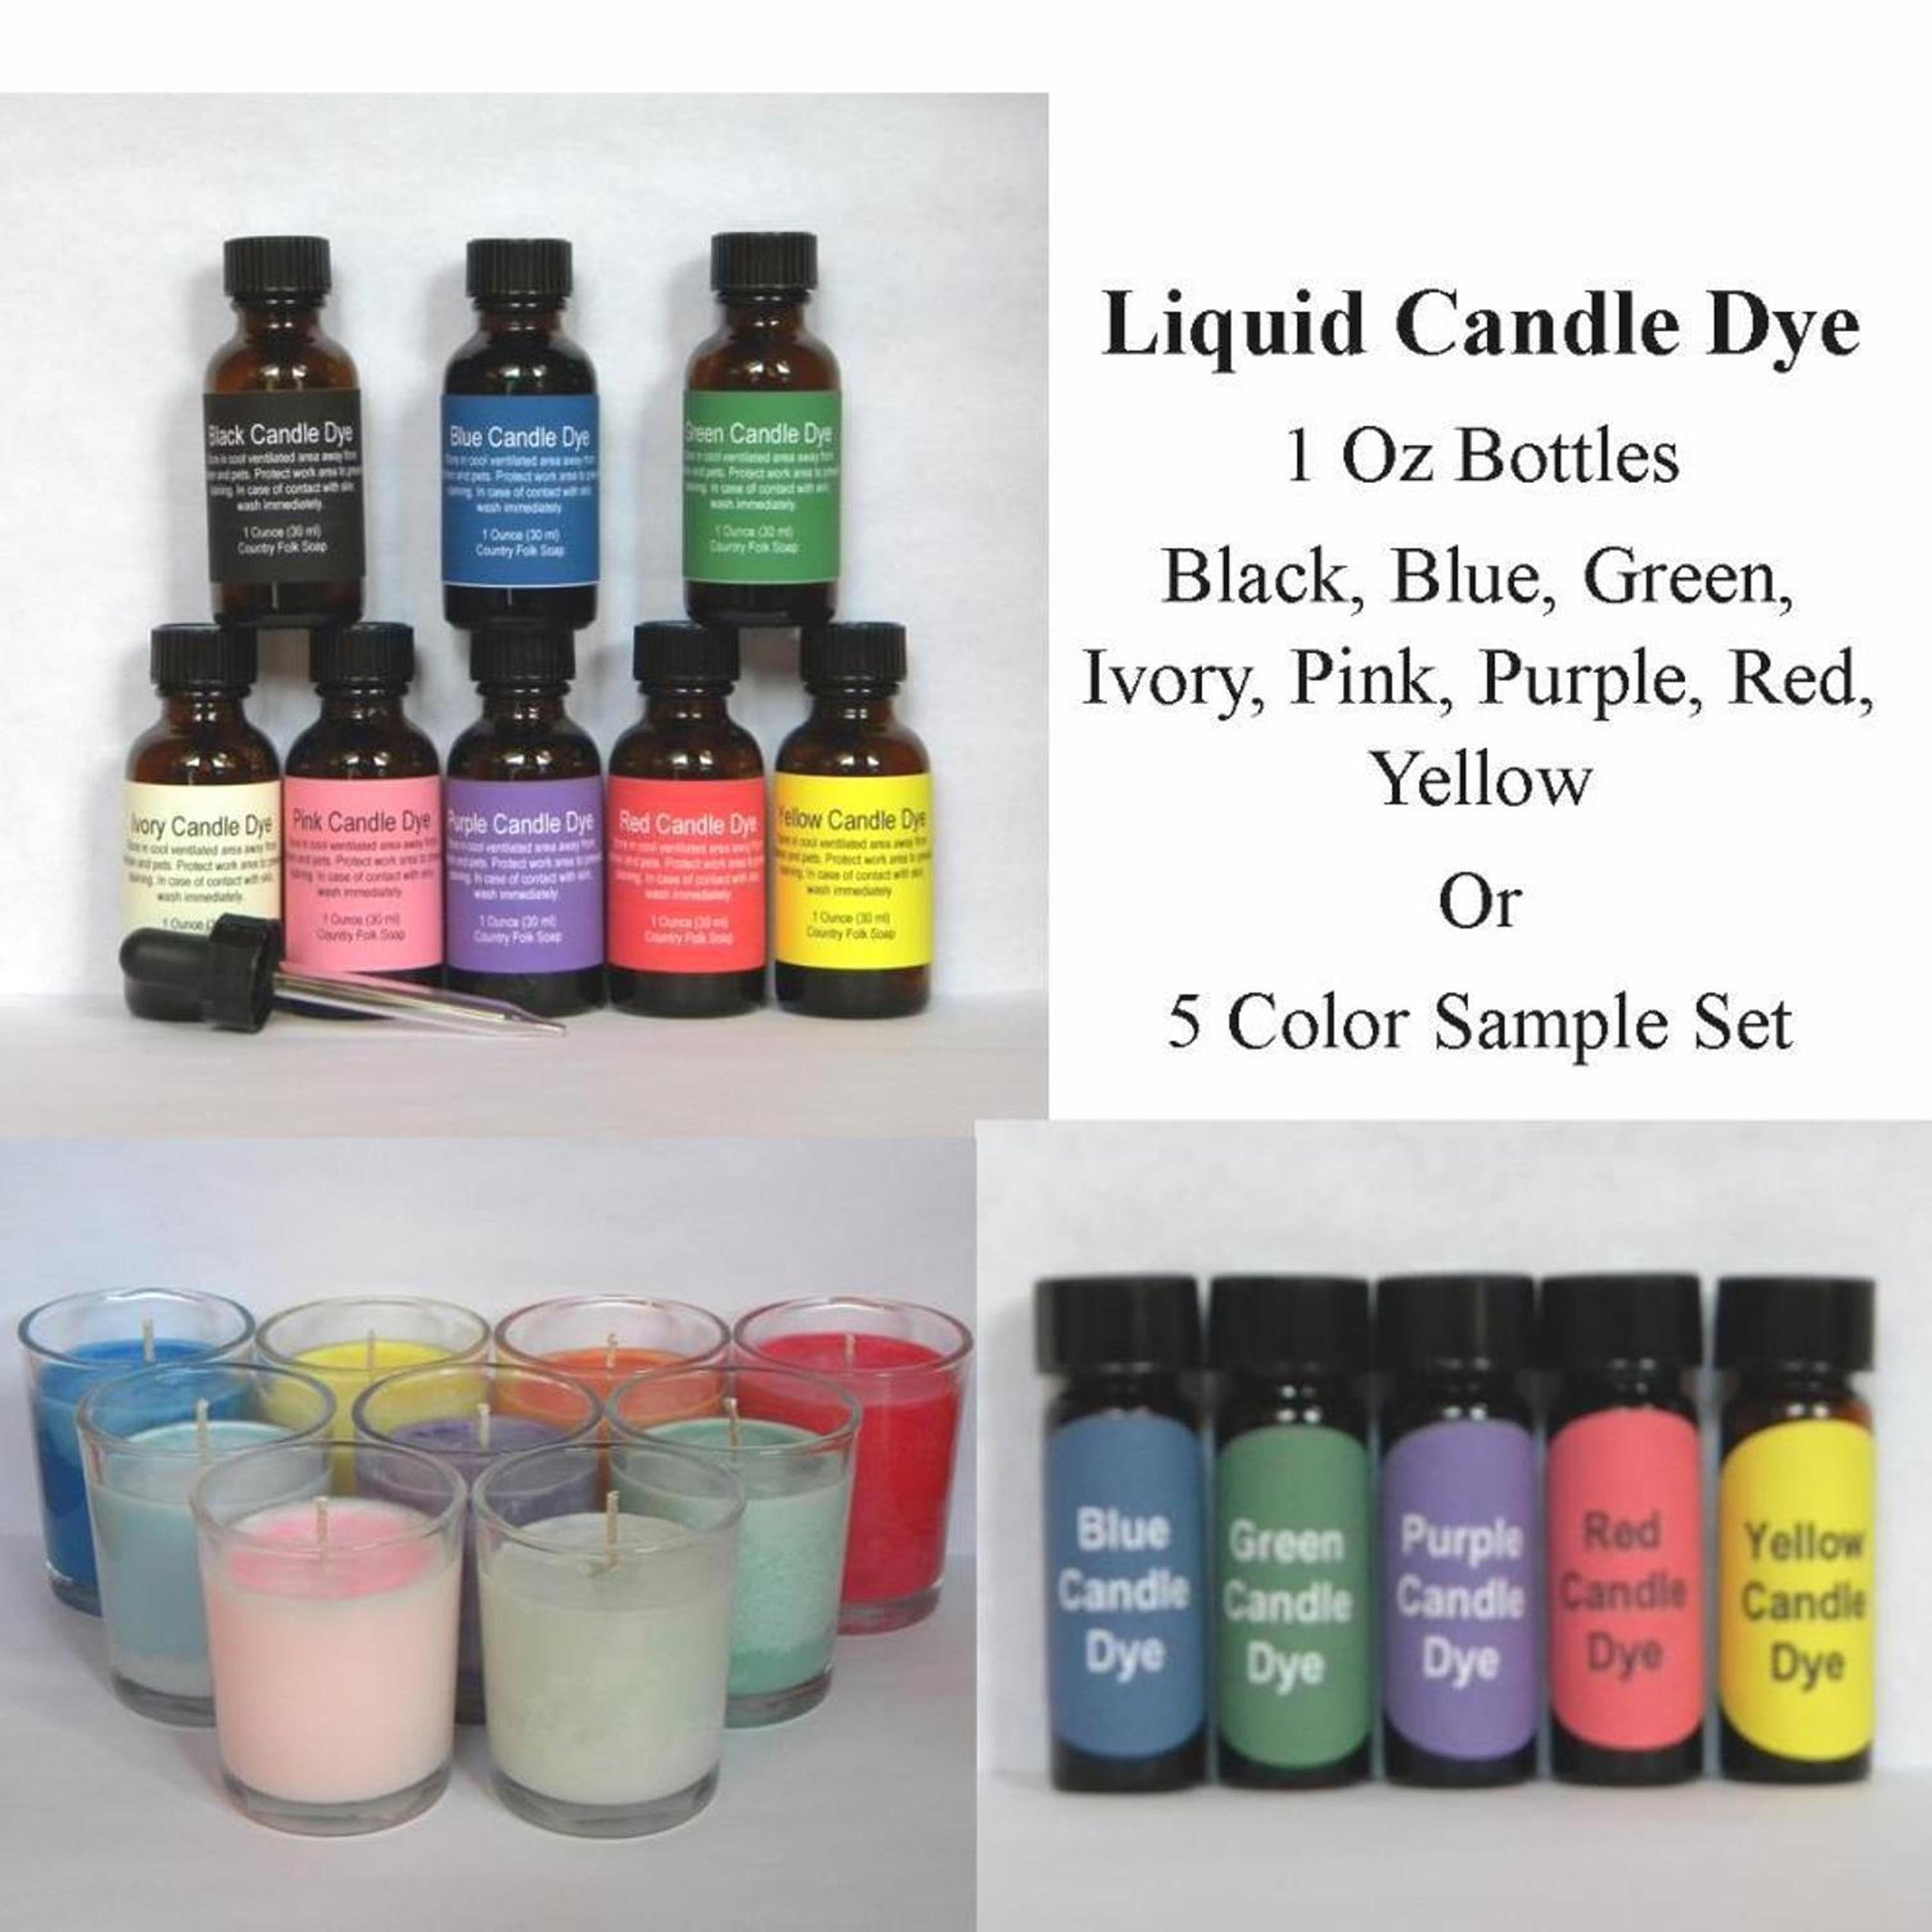  Black Candle Dye for Candle Making - Made in The USA - Easy to  Use - Highly Concentrated - Candle Making Supplies for Soy or Paraffin Wax  - Great Choice for